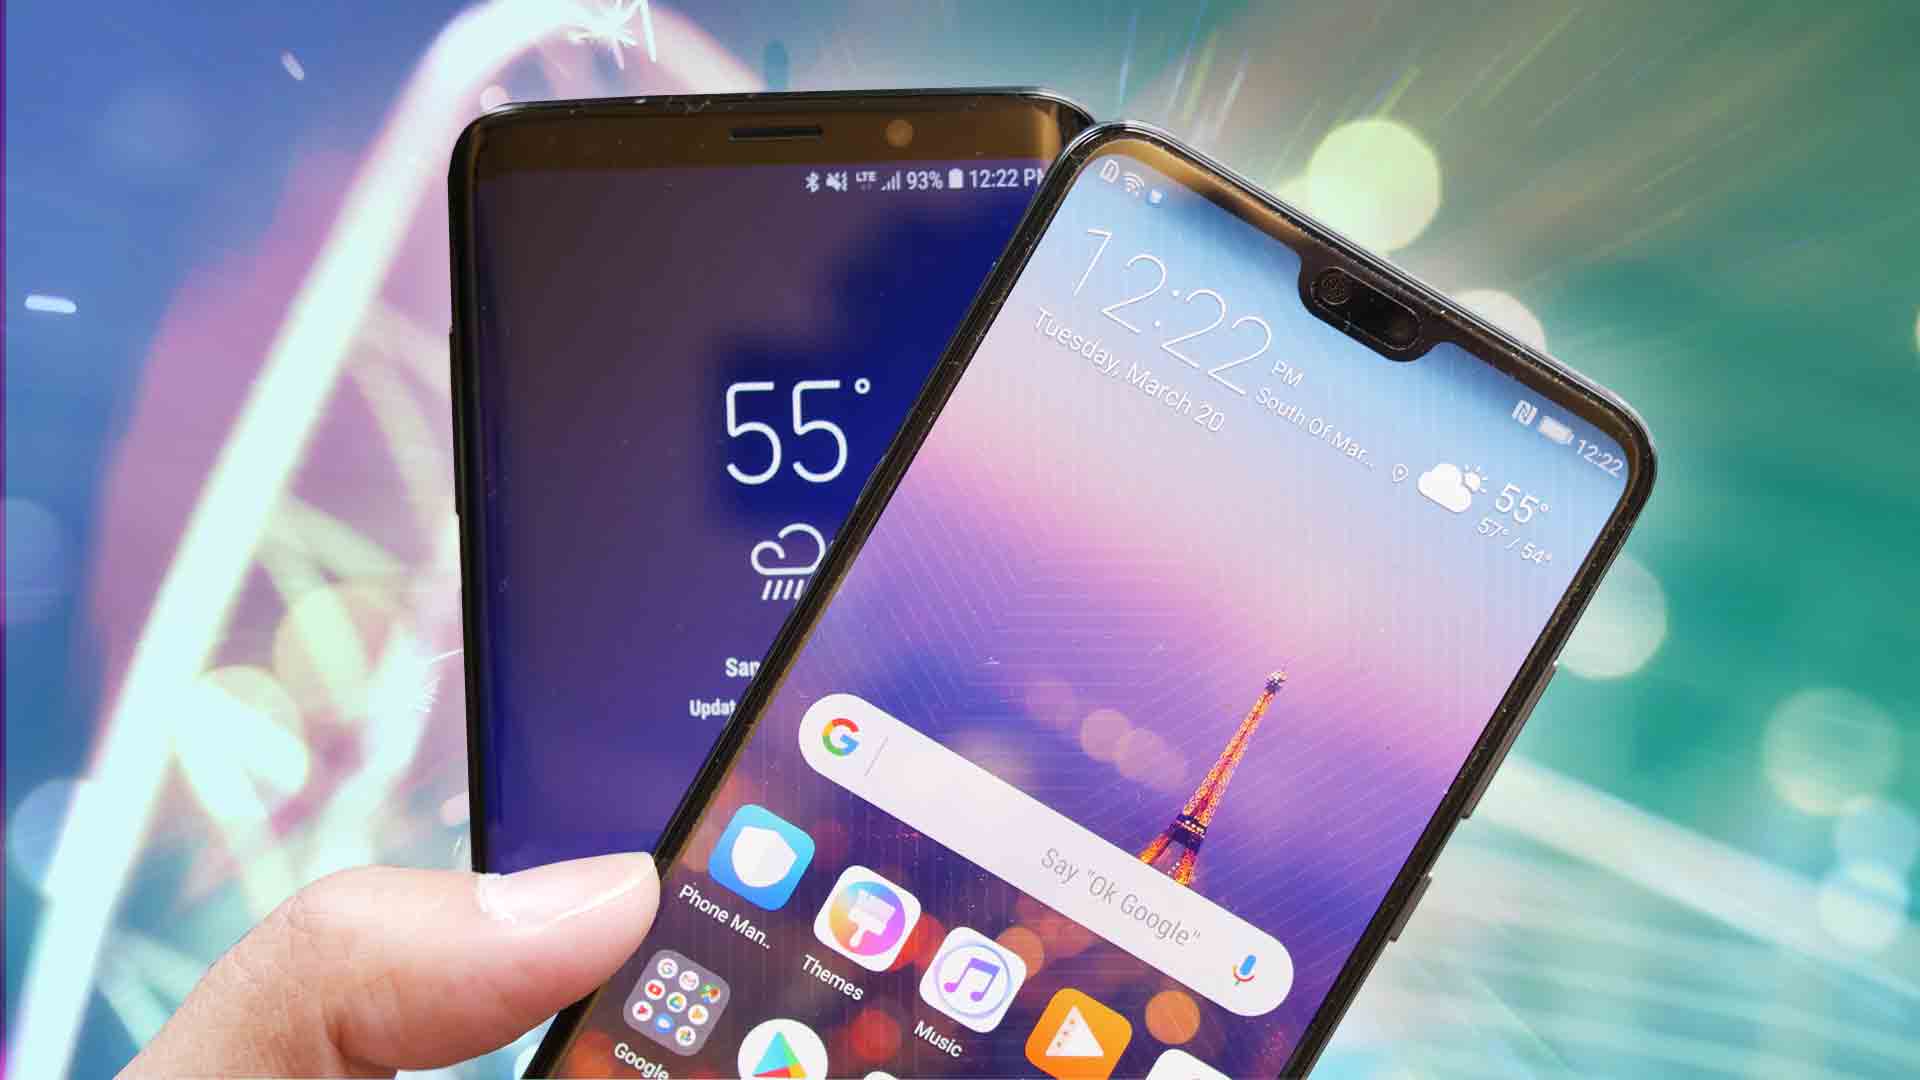 Huawei P20 - what are the best accessories?